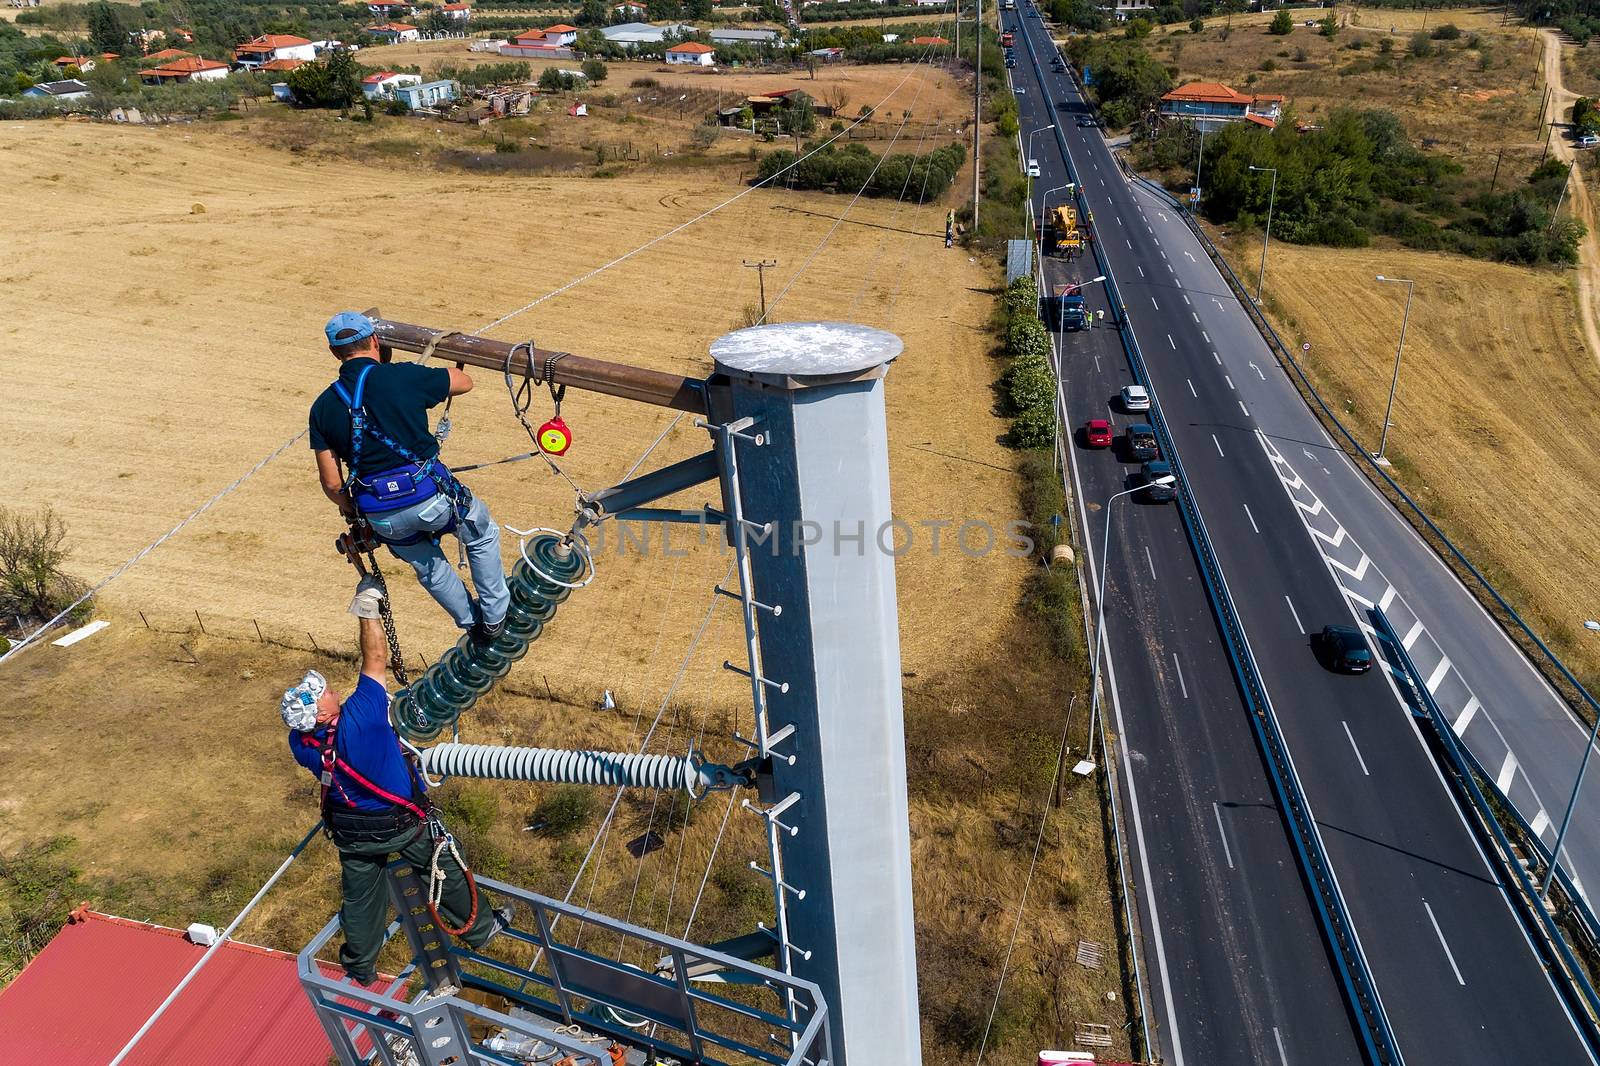 Electricians are climbing on electric poles to install and repai by ververidis